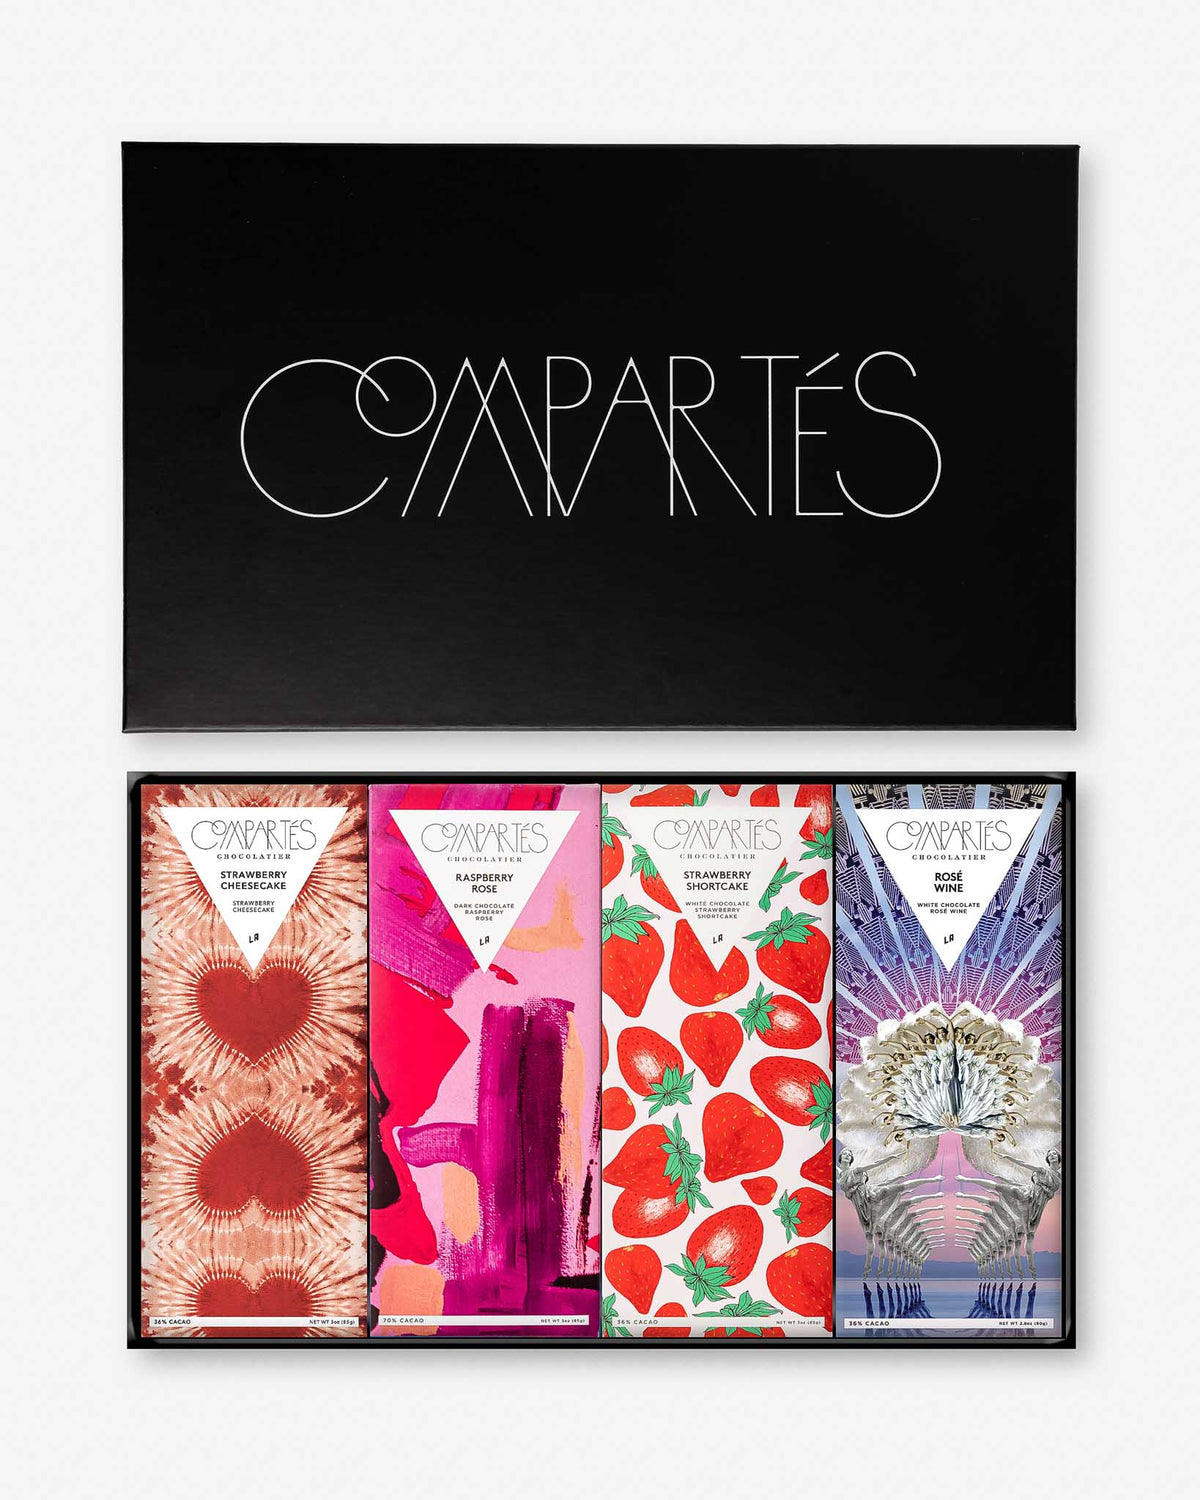 Fine Chocolates and Confections by Compartes - Premium Chocolate Bar Gift Box -4 Luxury Chocolate Bars